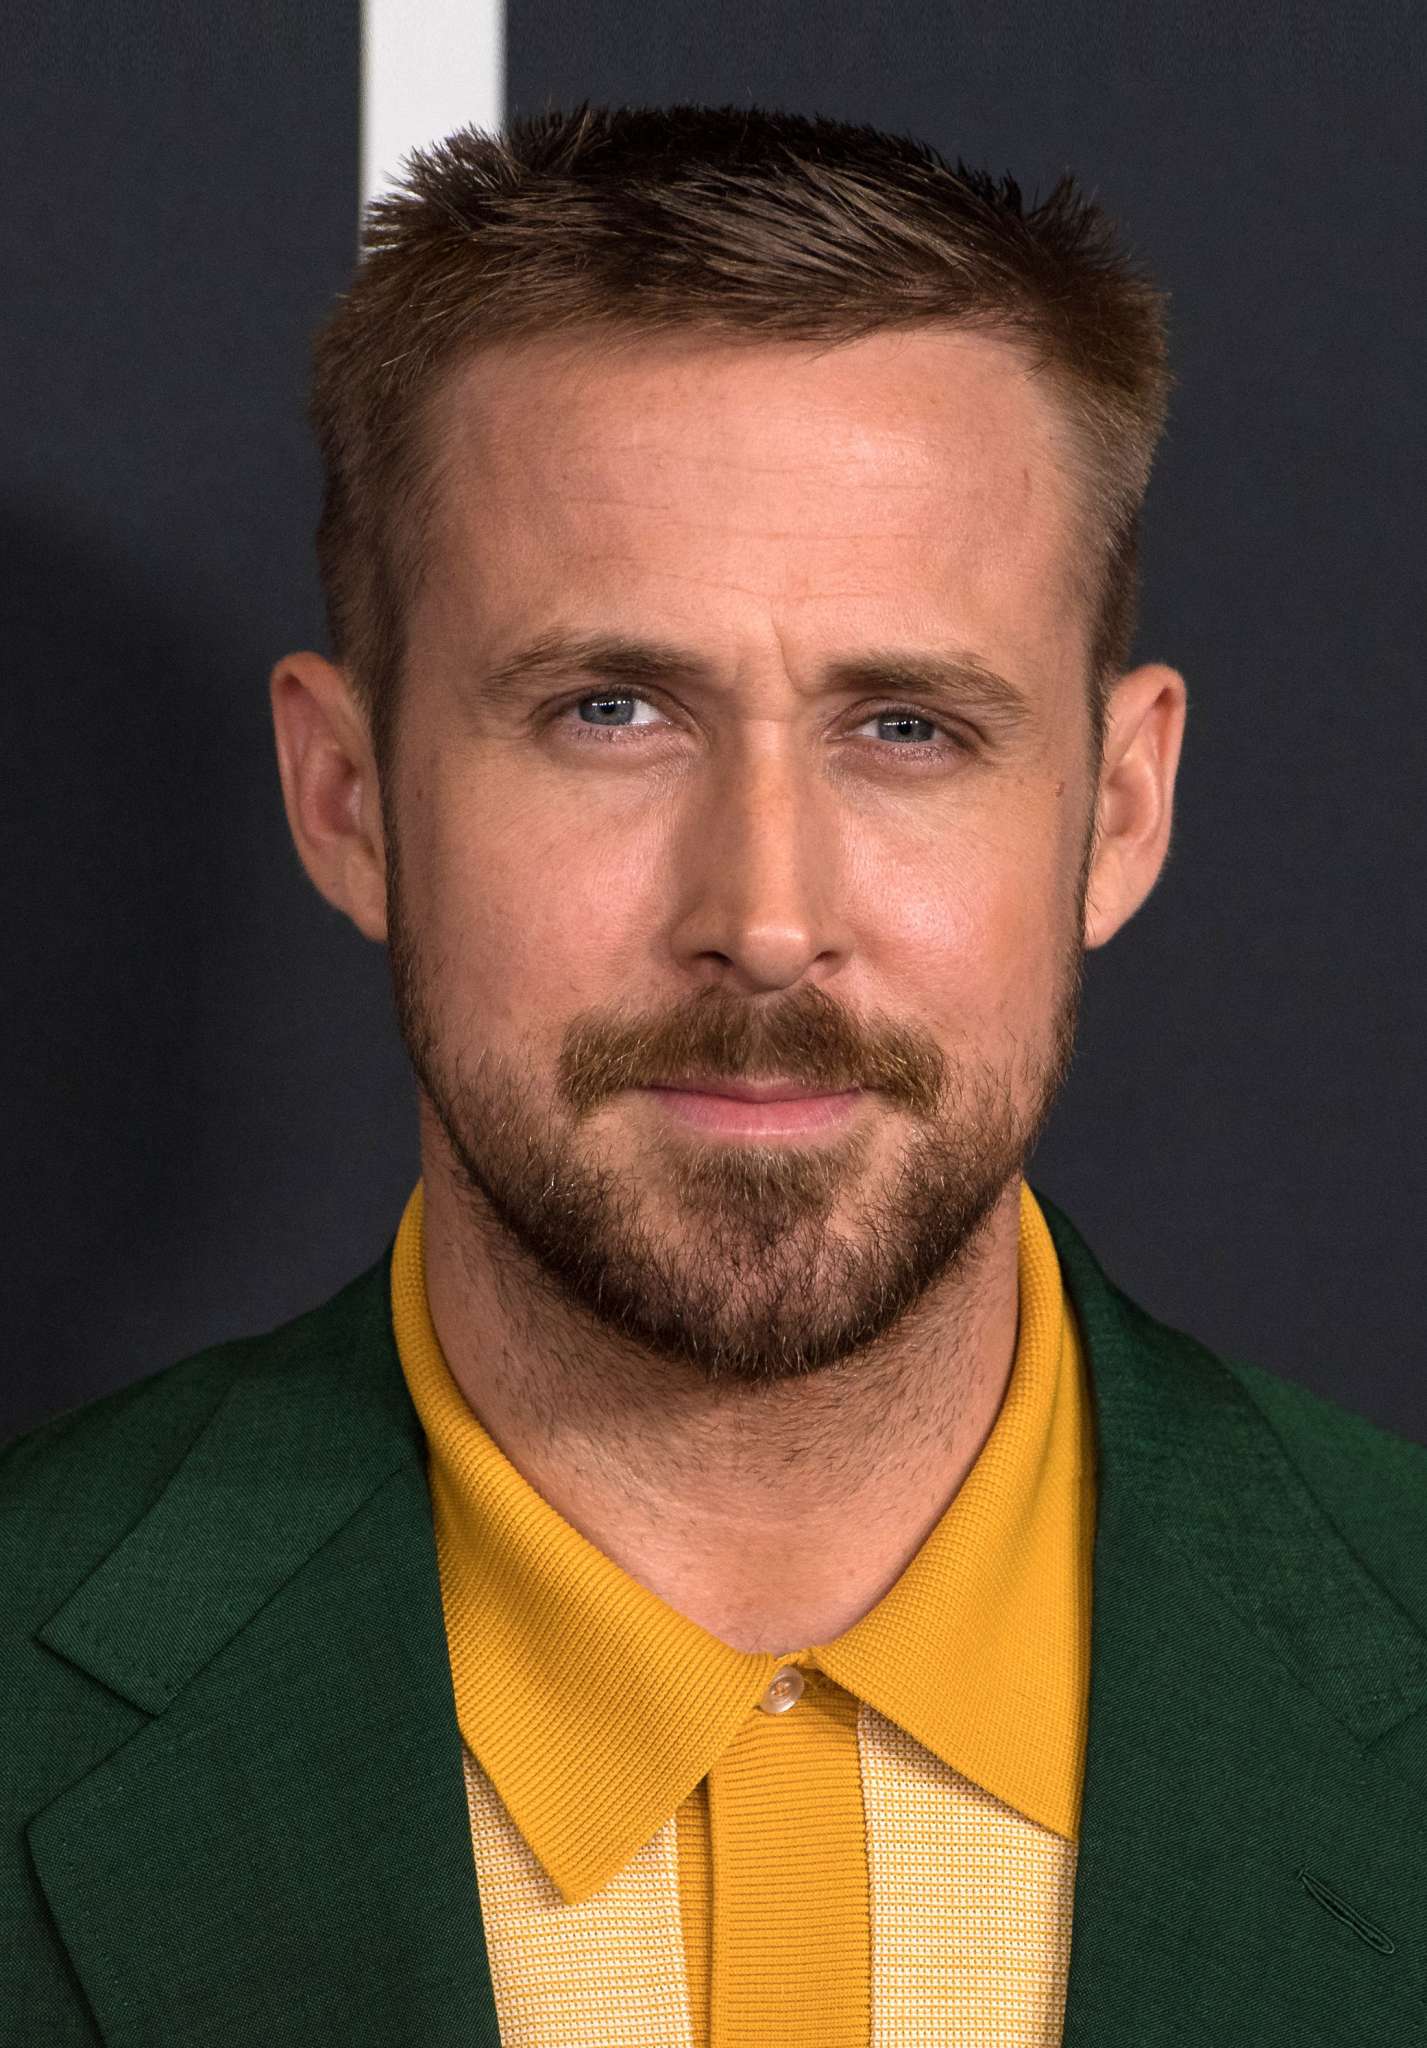 Ryan Gosling Tells Hilarious Story About His Daughter On The Tonight Show